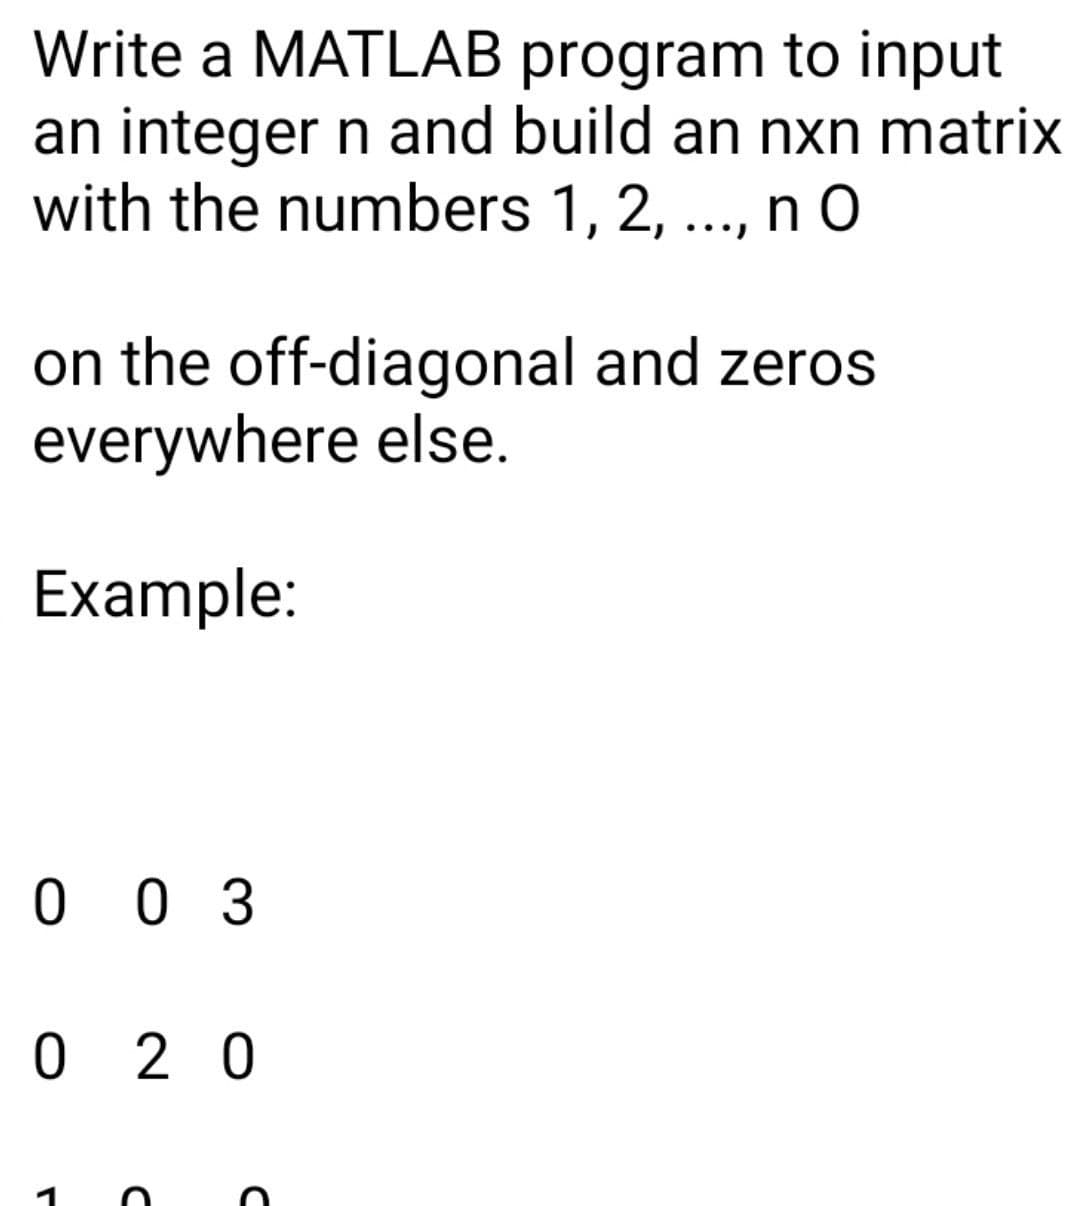 Write a MATLAB program to input
an integer n and build an nxn matrix
with the numbers 1, 2, ..., n O
••.)
on the off-diagonal and zeros
everywhere else.
Example:
0 0 3
0 2 0
